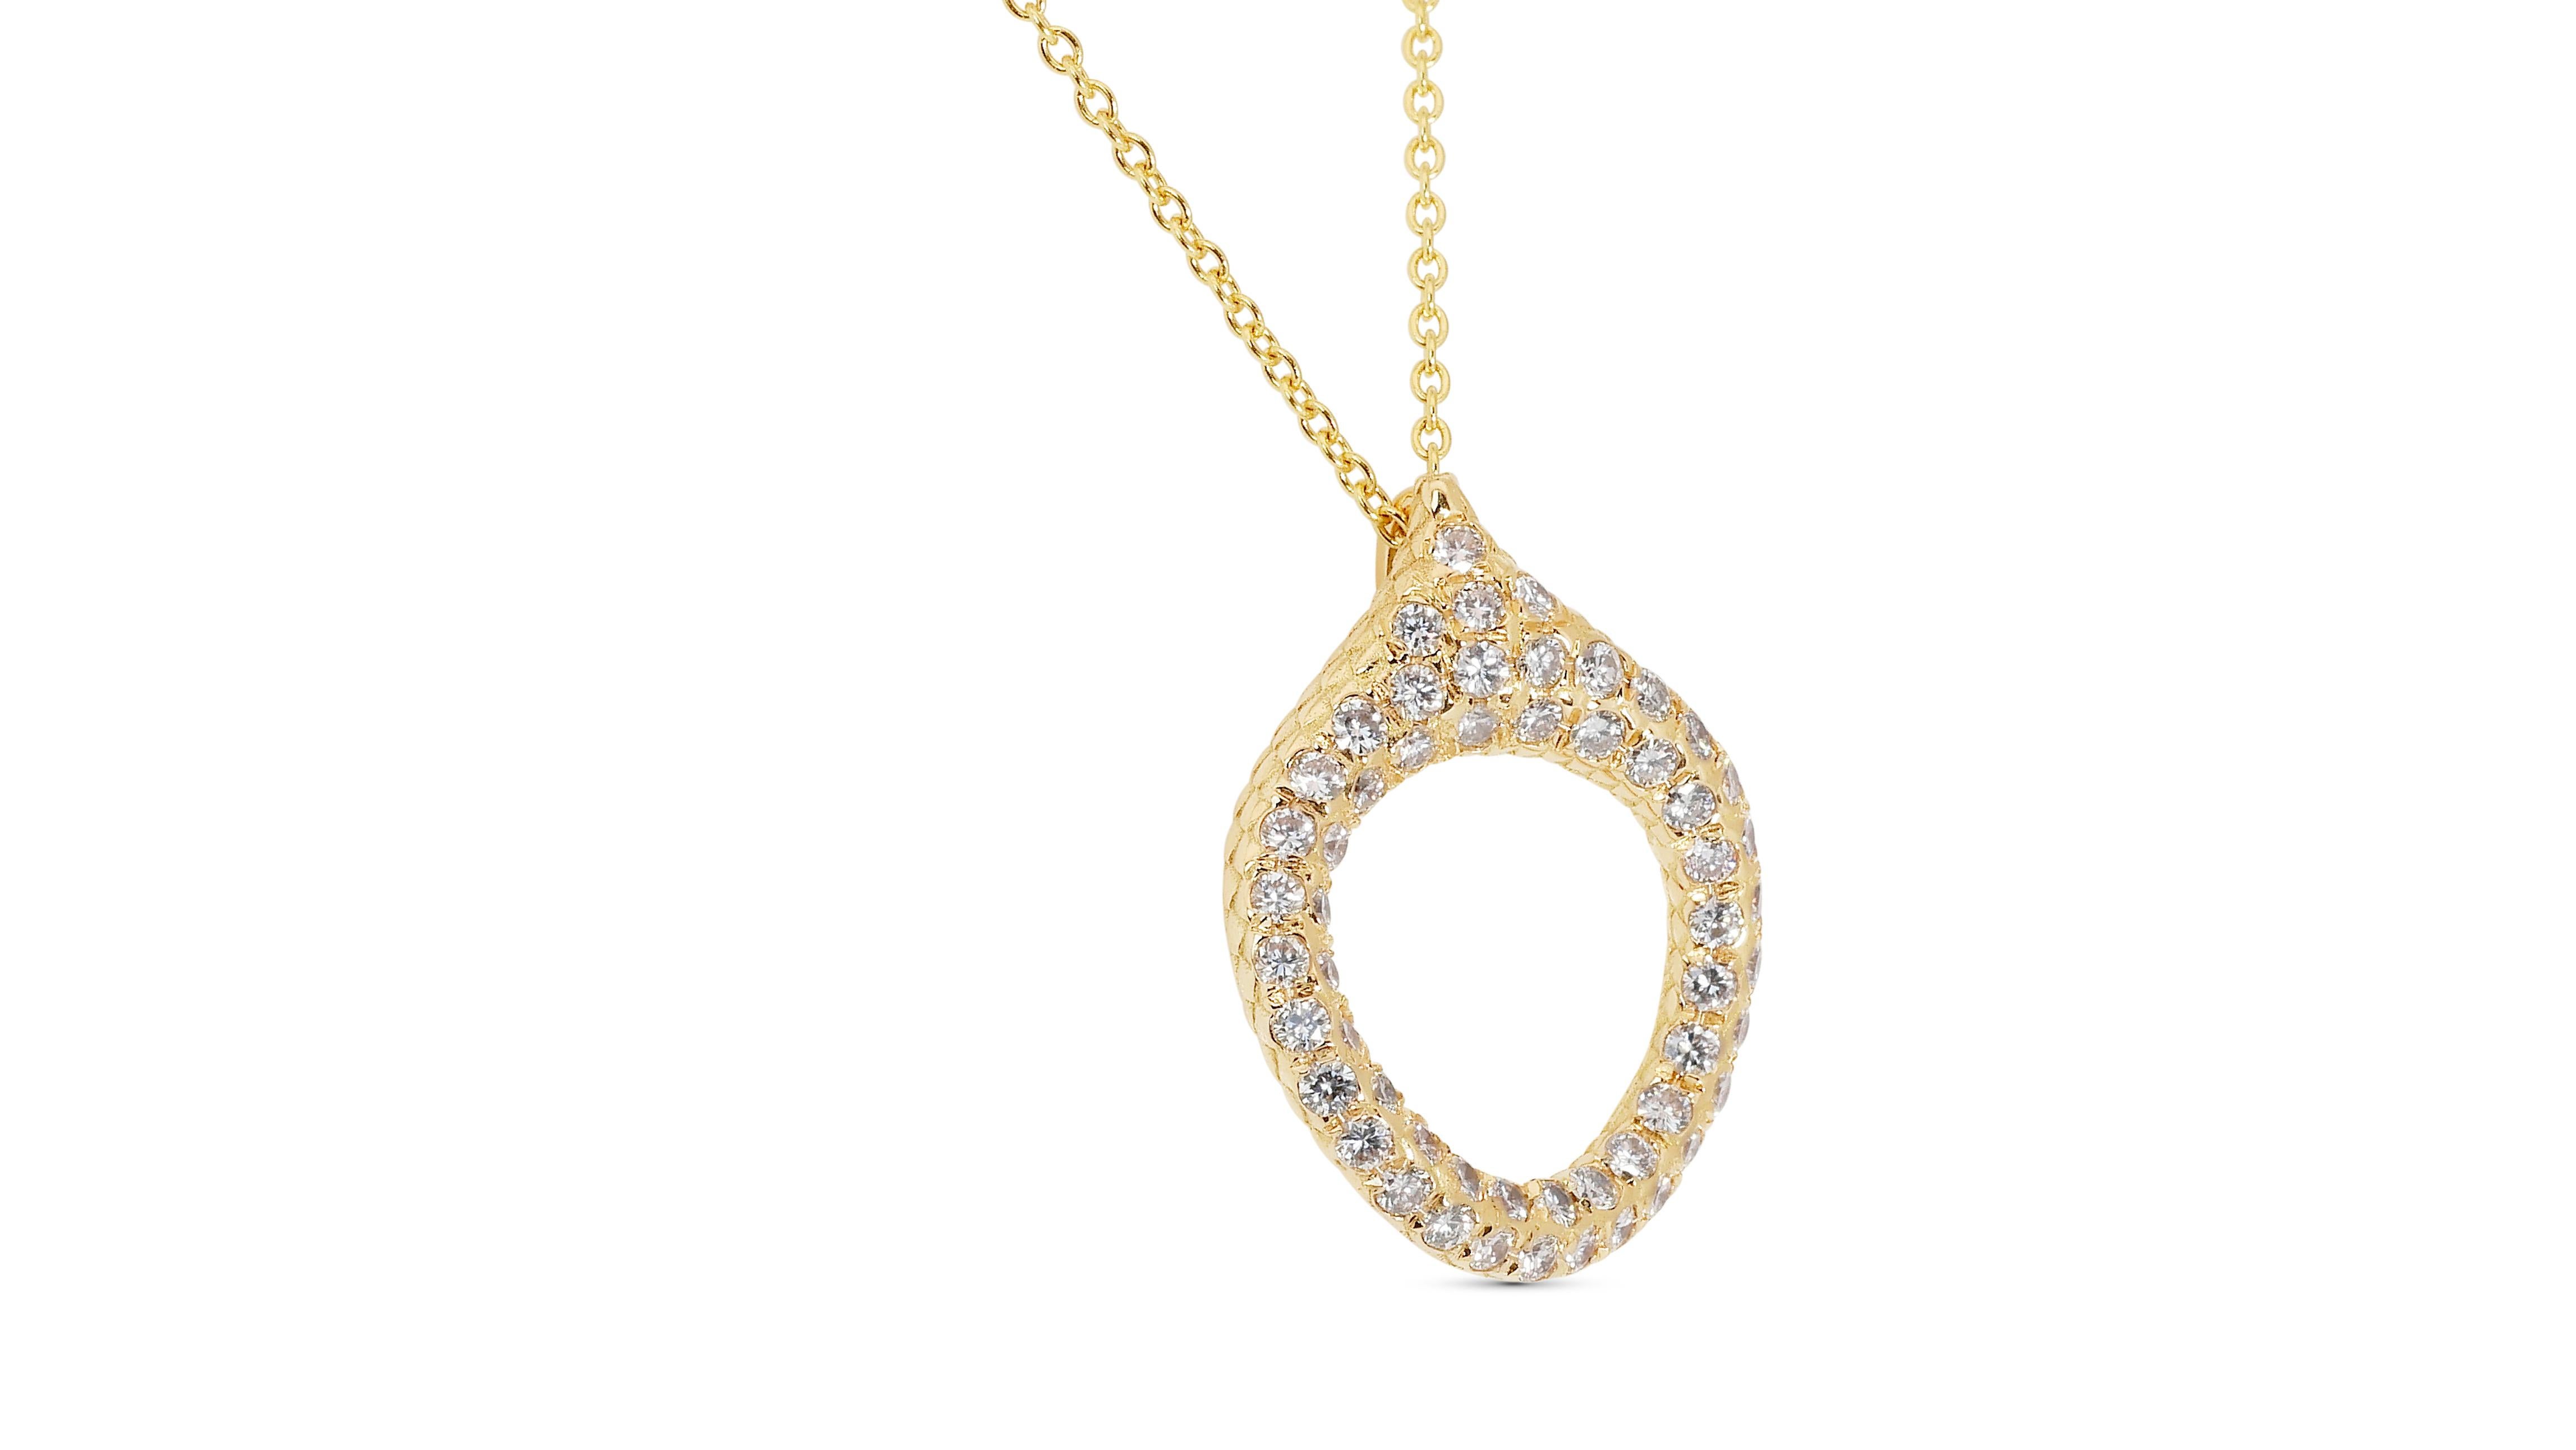 Dazzling 18k Yellow Gold Necklace w/ 1.16 Carat Natural Diamonds IGI Certificate For Sale 1